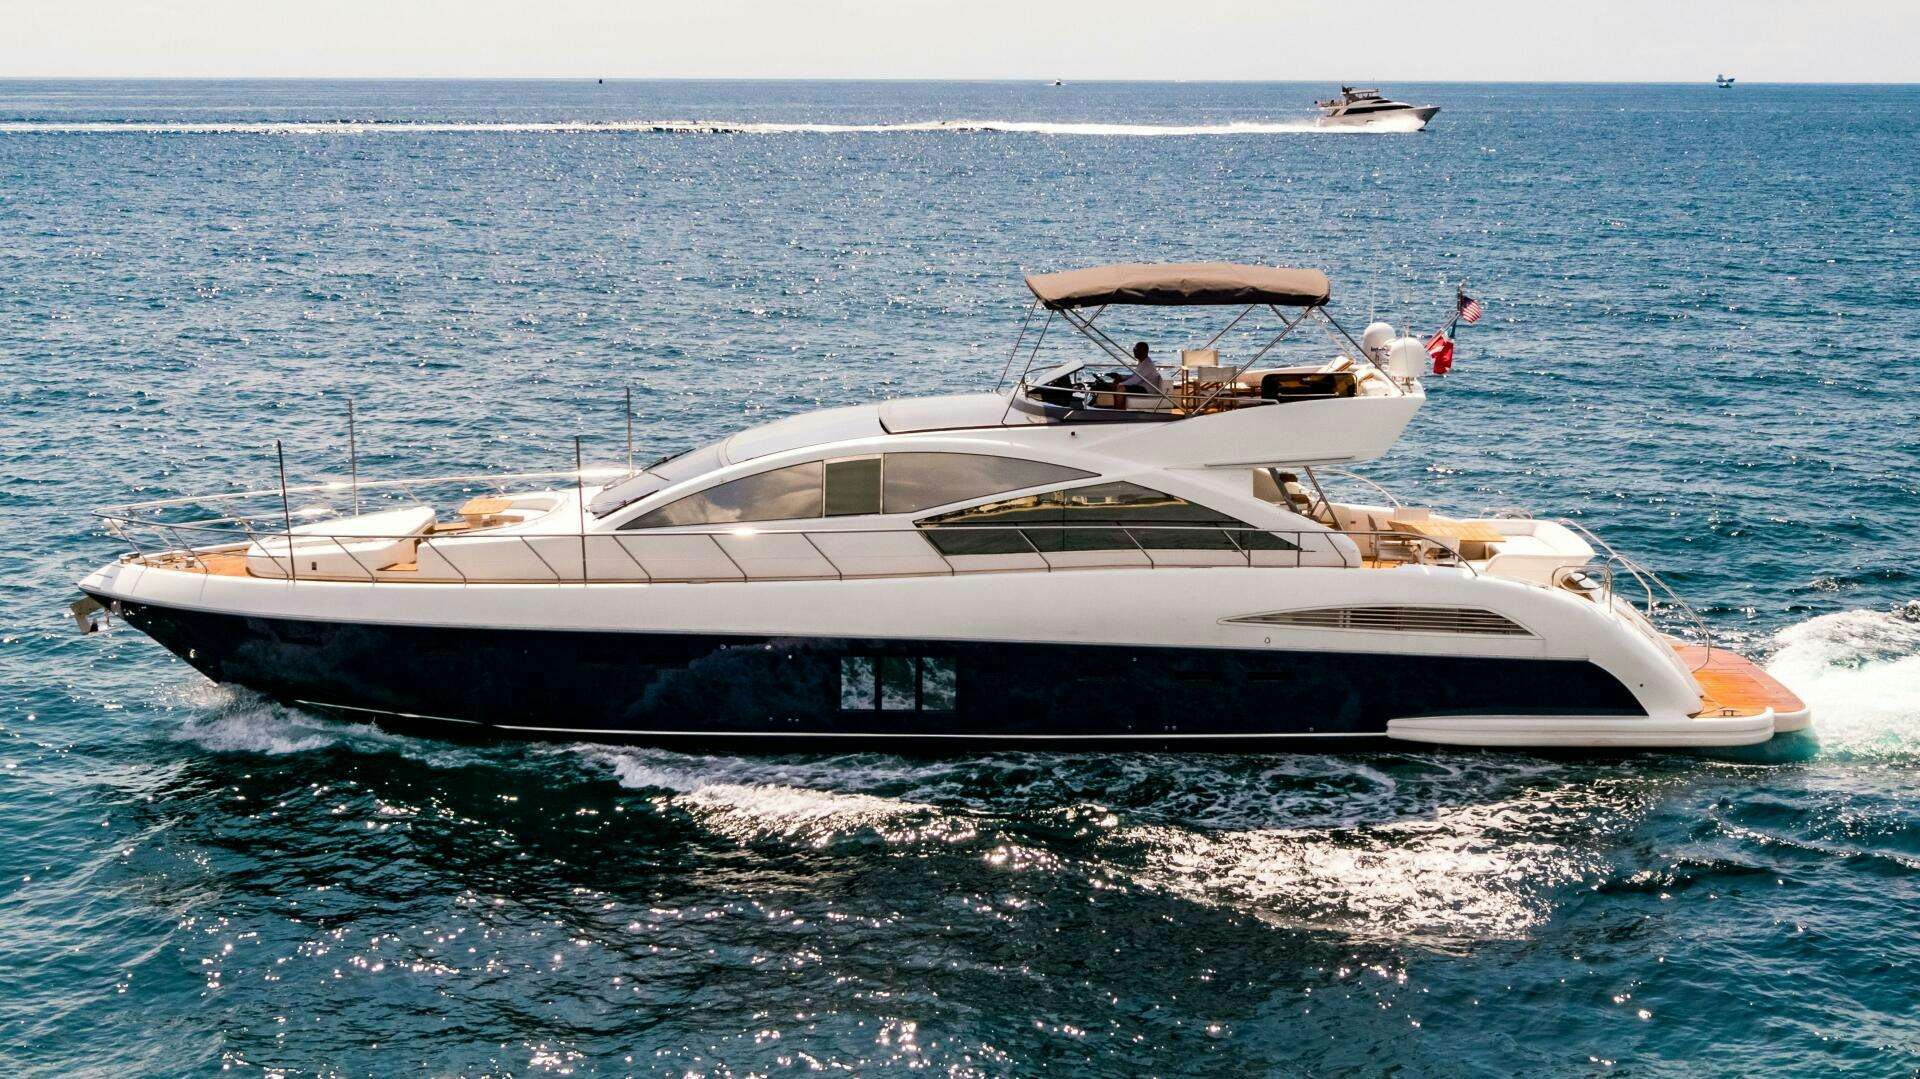 Veloce ii
Yacht for Sale